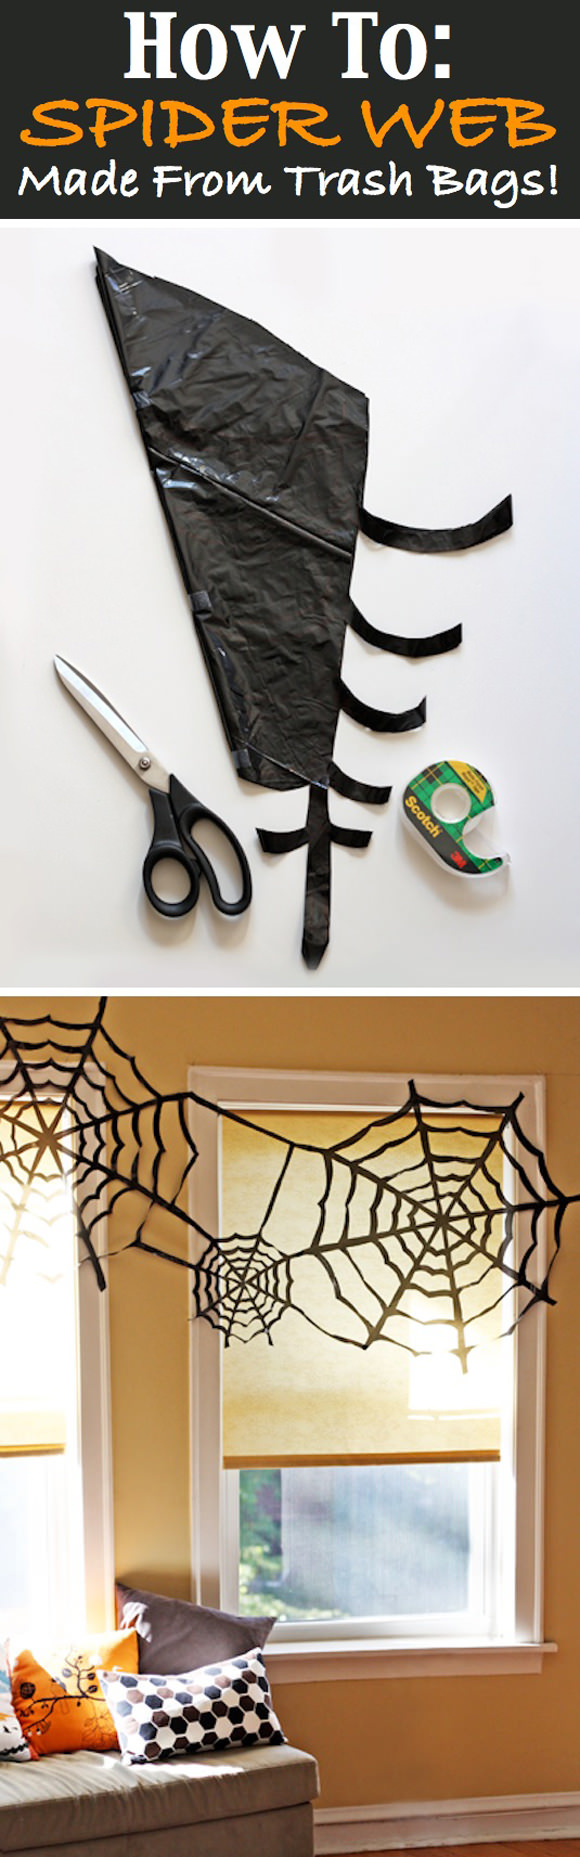 DIY Spiderwebs Made From Trashbags